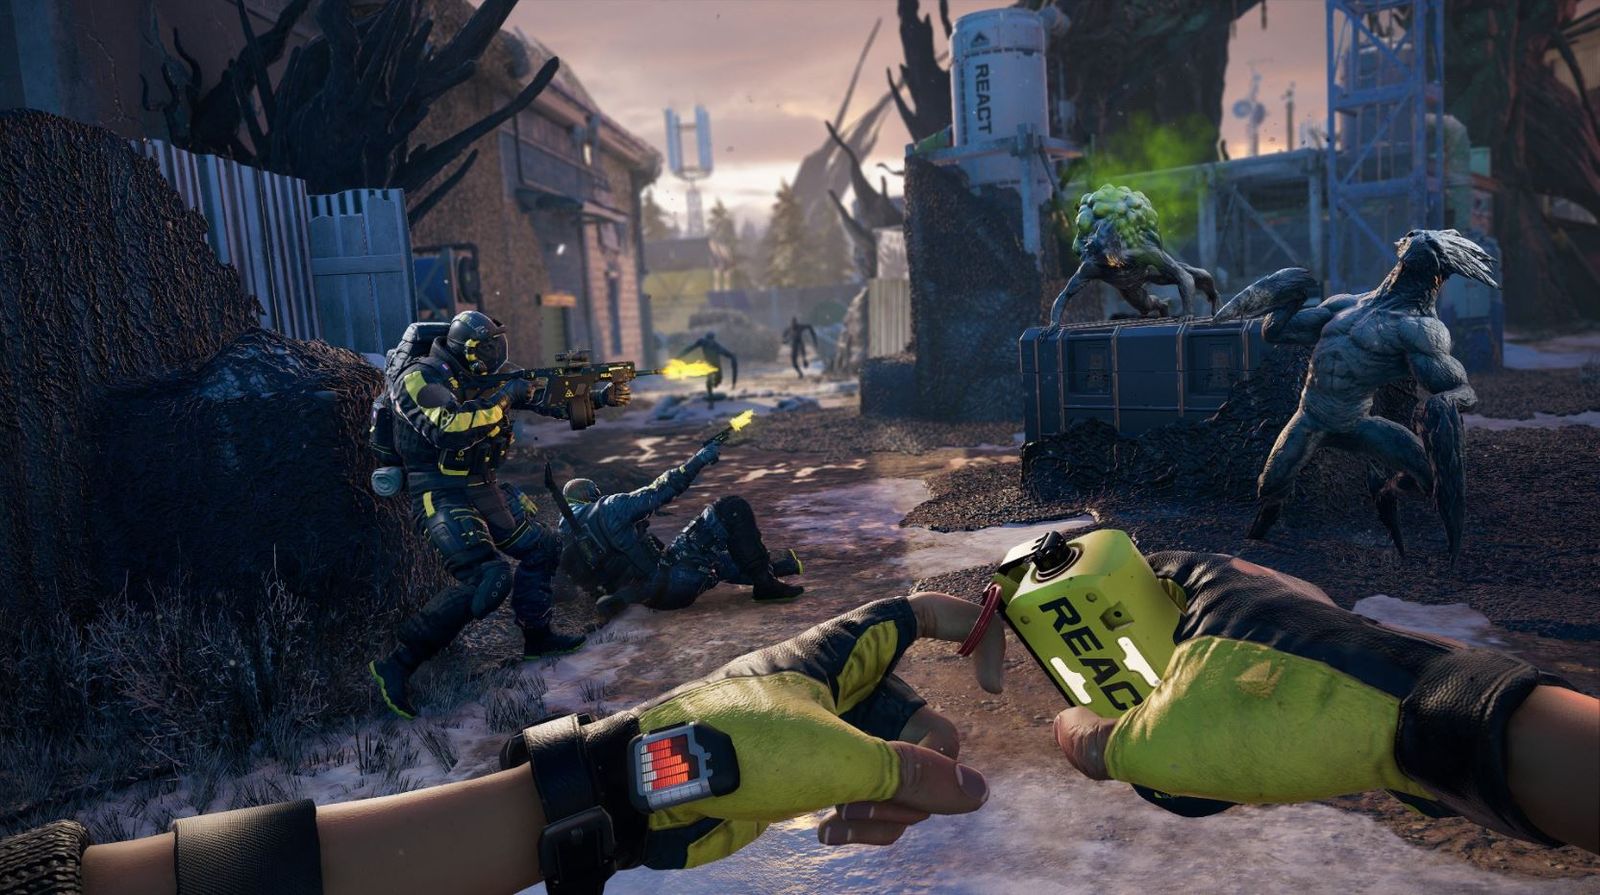 Rainbow Six Extraction screenshot - three soldiers surrounded by the Archaens. One soldier in front wearing yellow and black gloves, preparing to throw a "REACT" grenade.